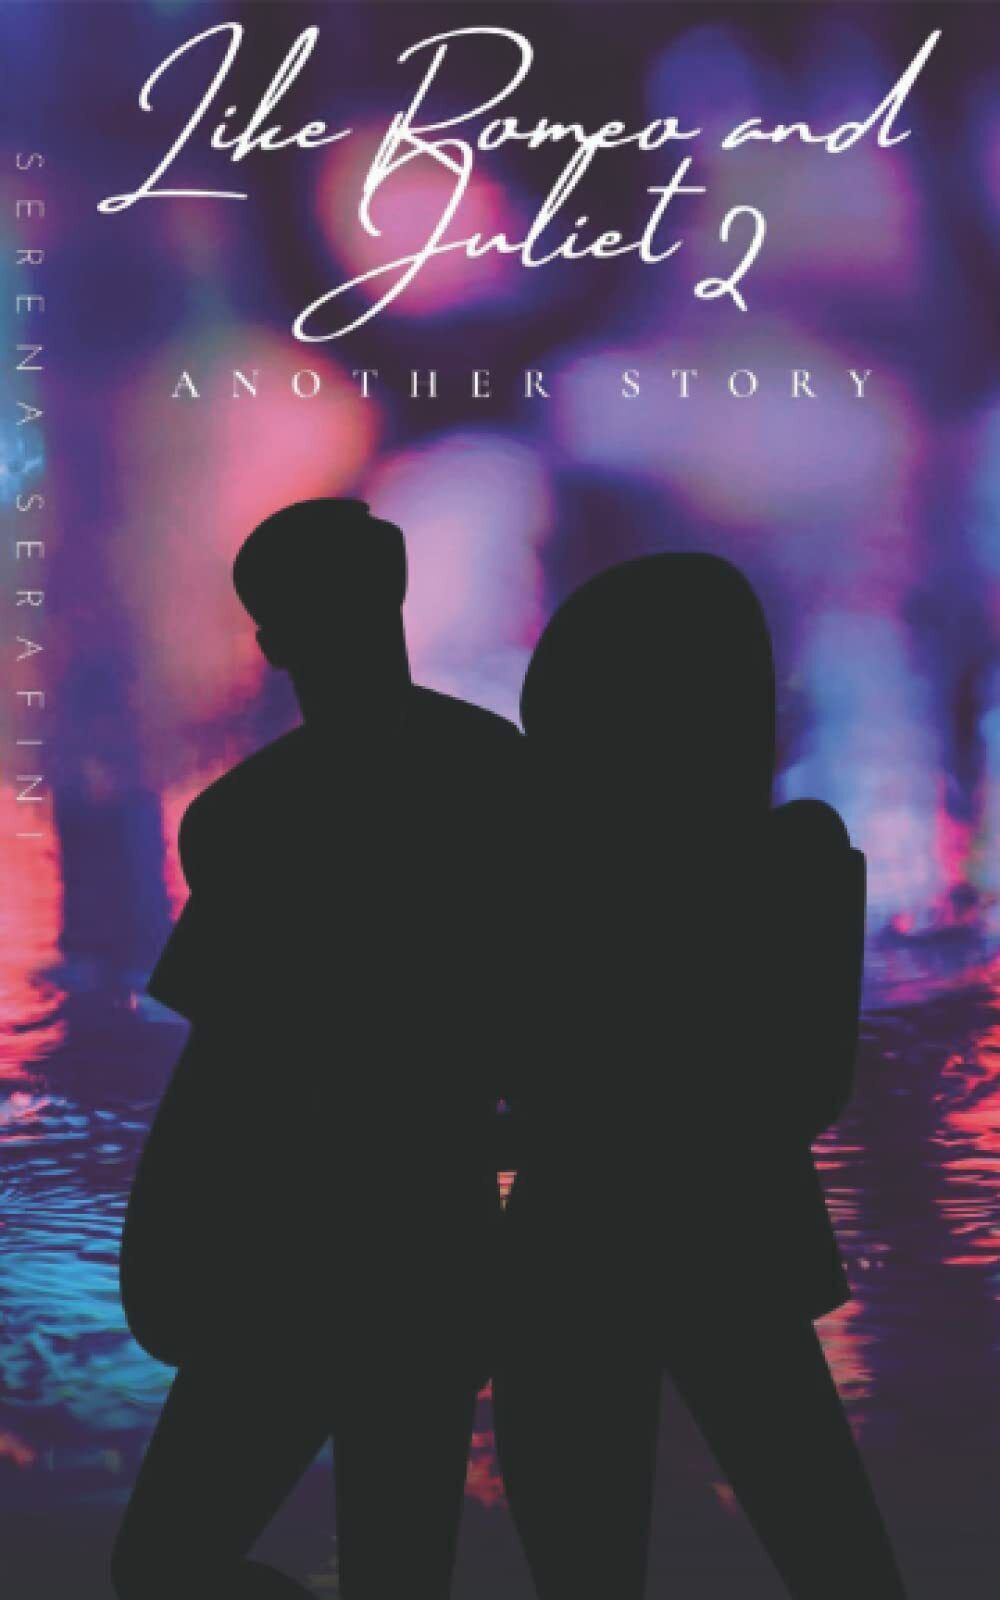 Like Romeo and Juliet 2: Another story di Serena Serafini,  2022,  Indipendent libro usato